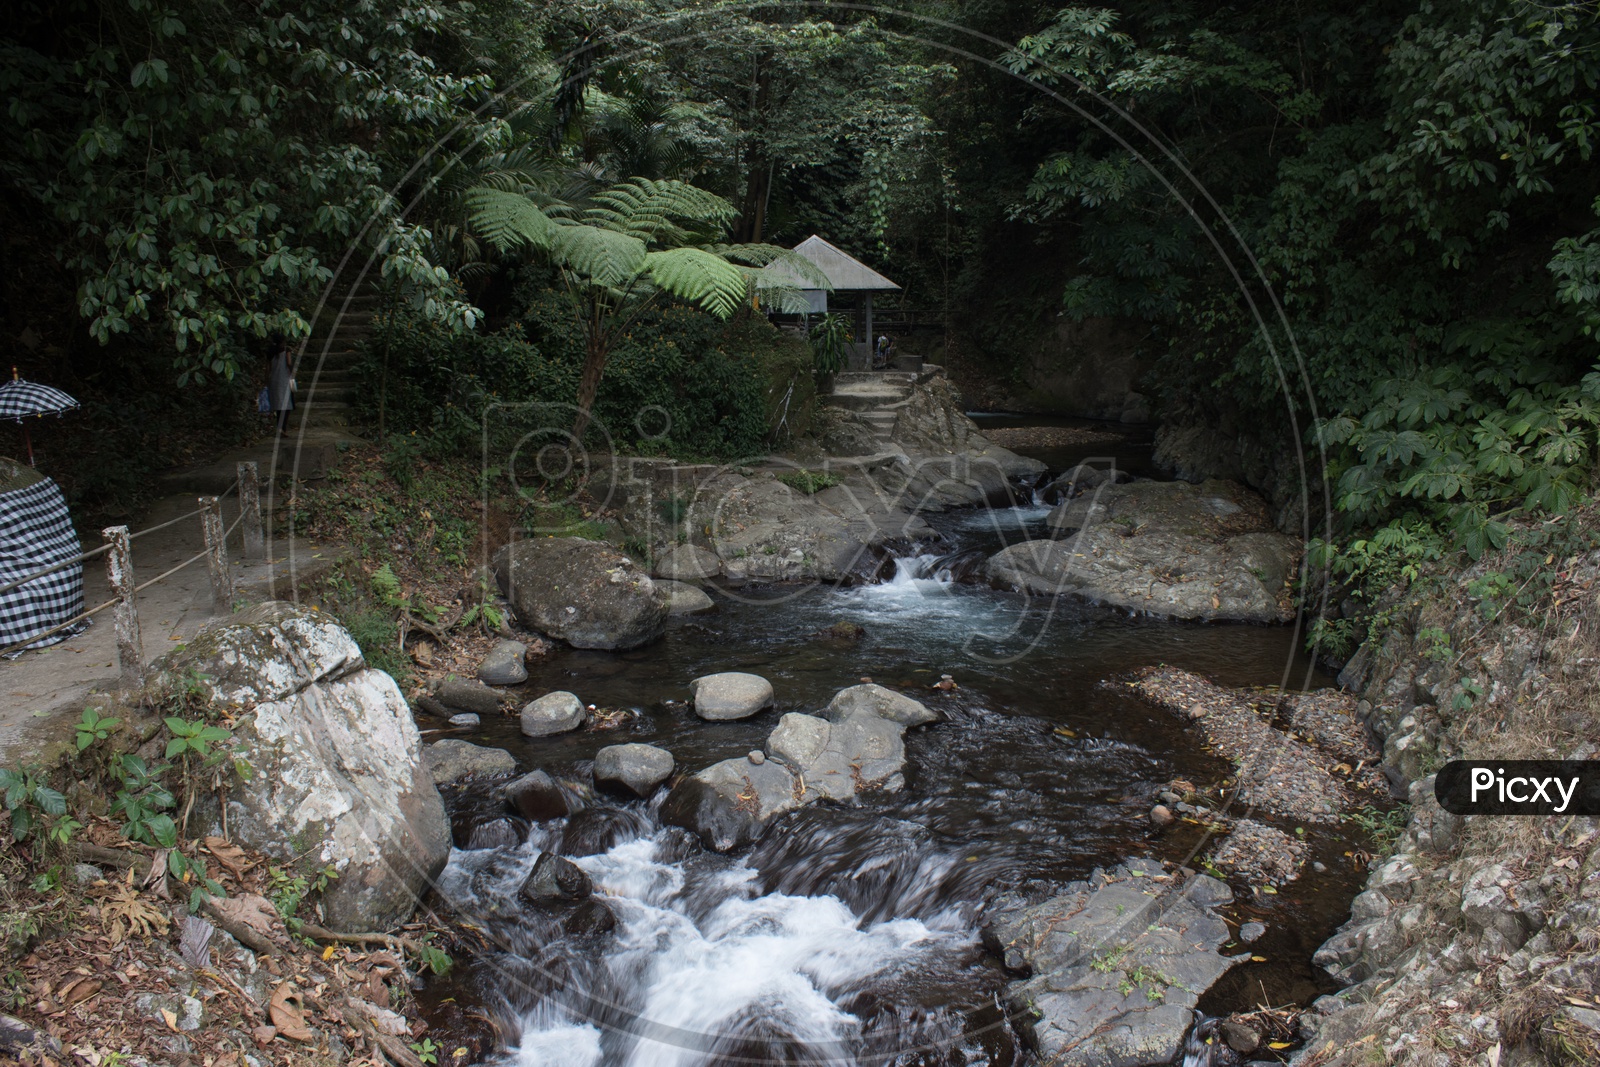 Water Falls In Bali / Forests in Bali / Views Of Bali / Forest Views of Bali